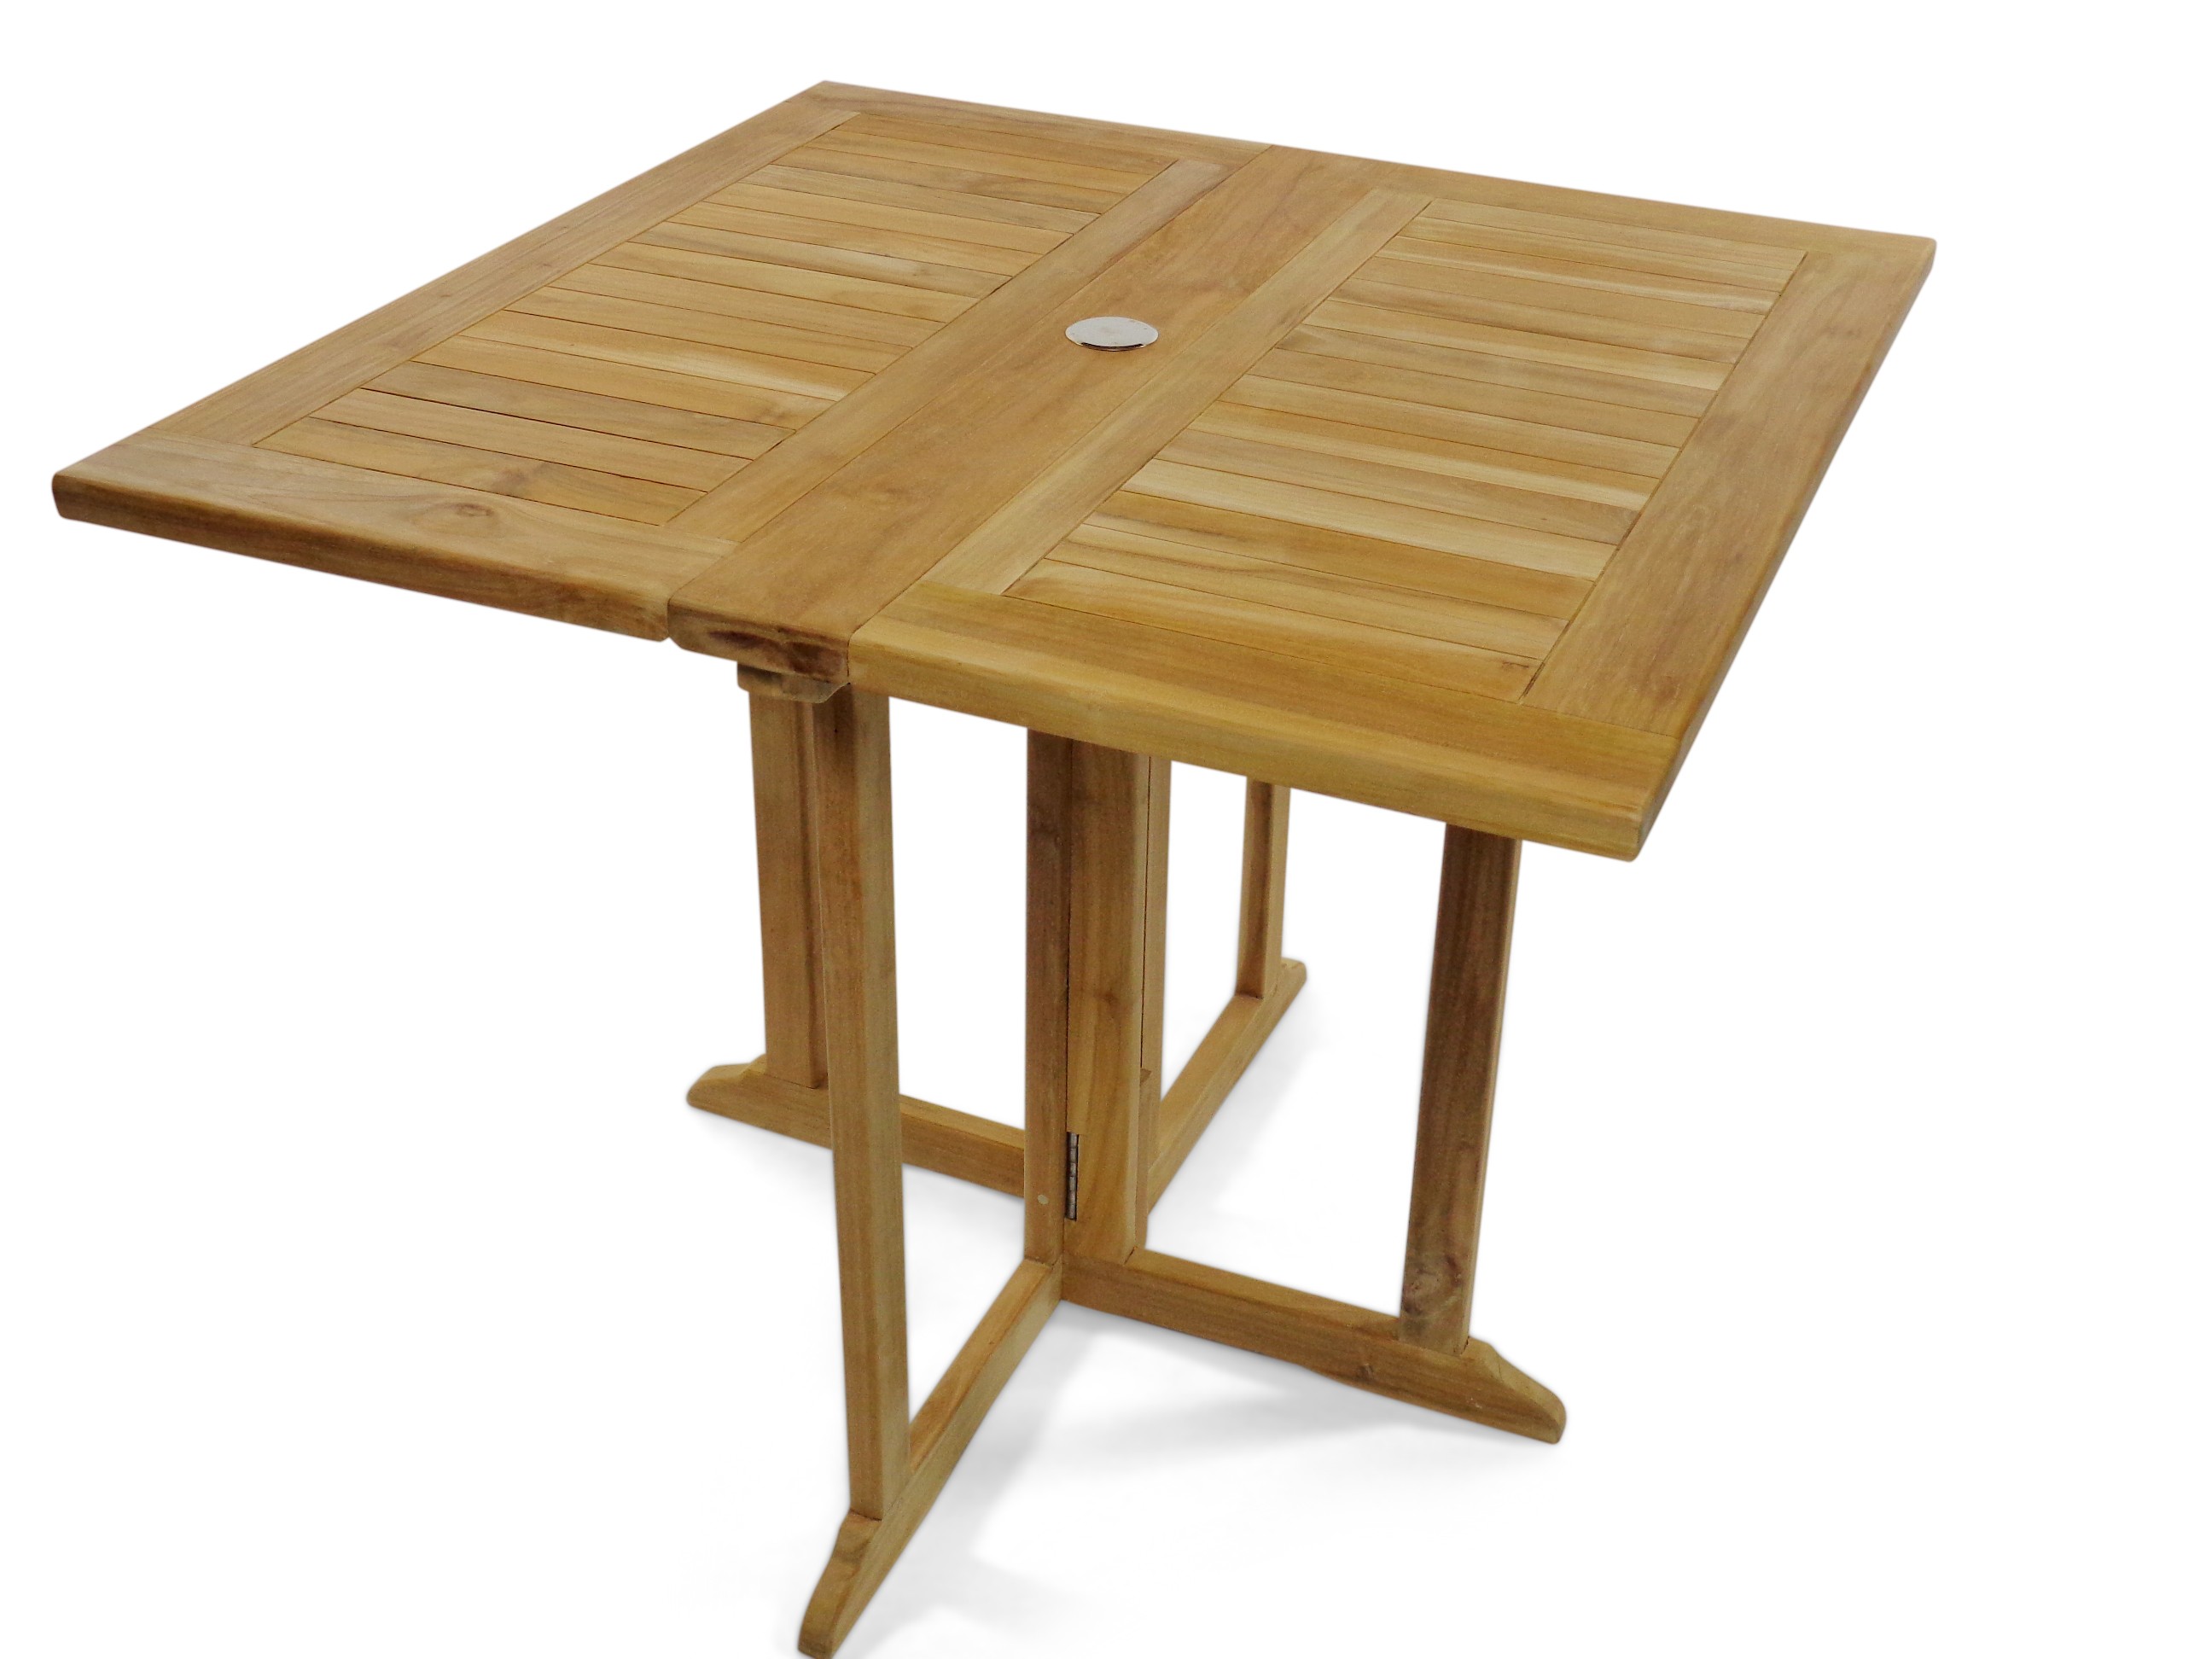 Barcelone 31" Square Drop Leaf Folding Teak Table...Use With 1 Leaf Up Or 2.... Makes 2 Different Tables